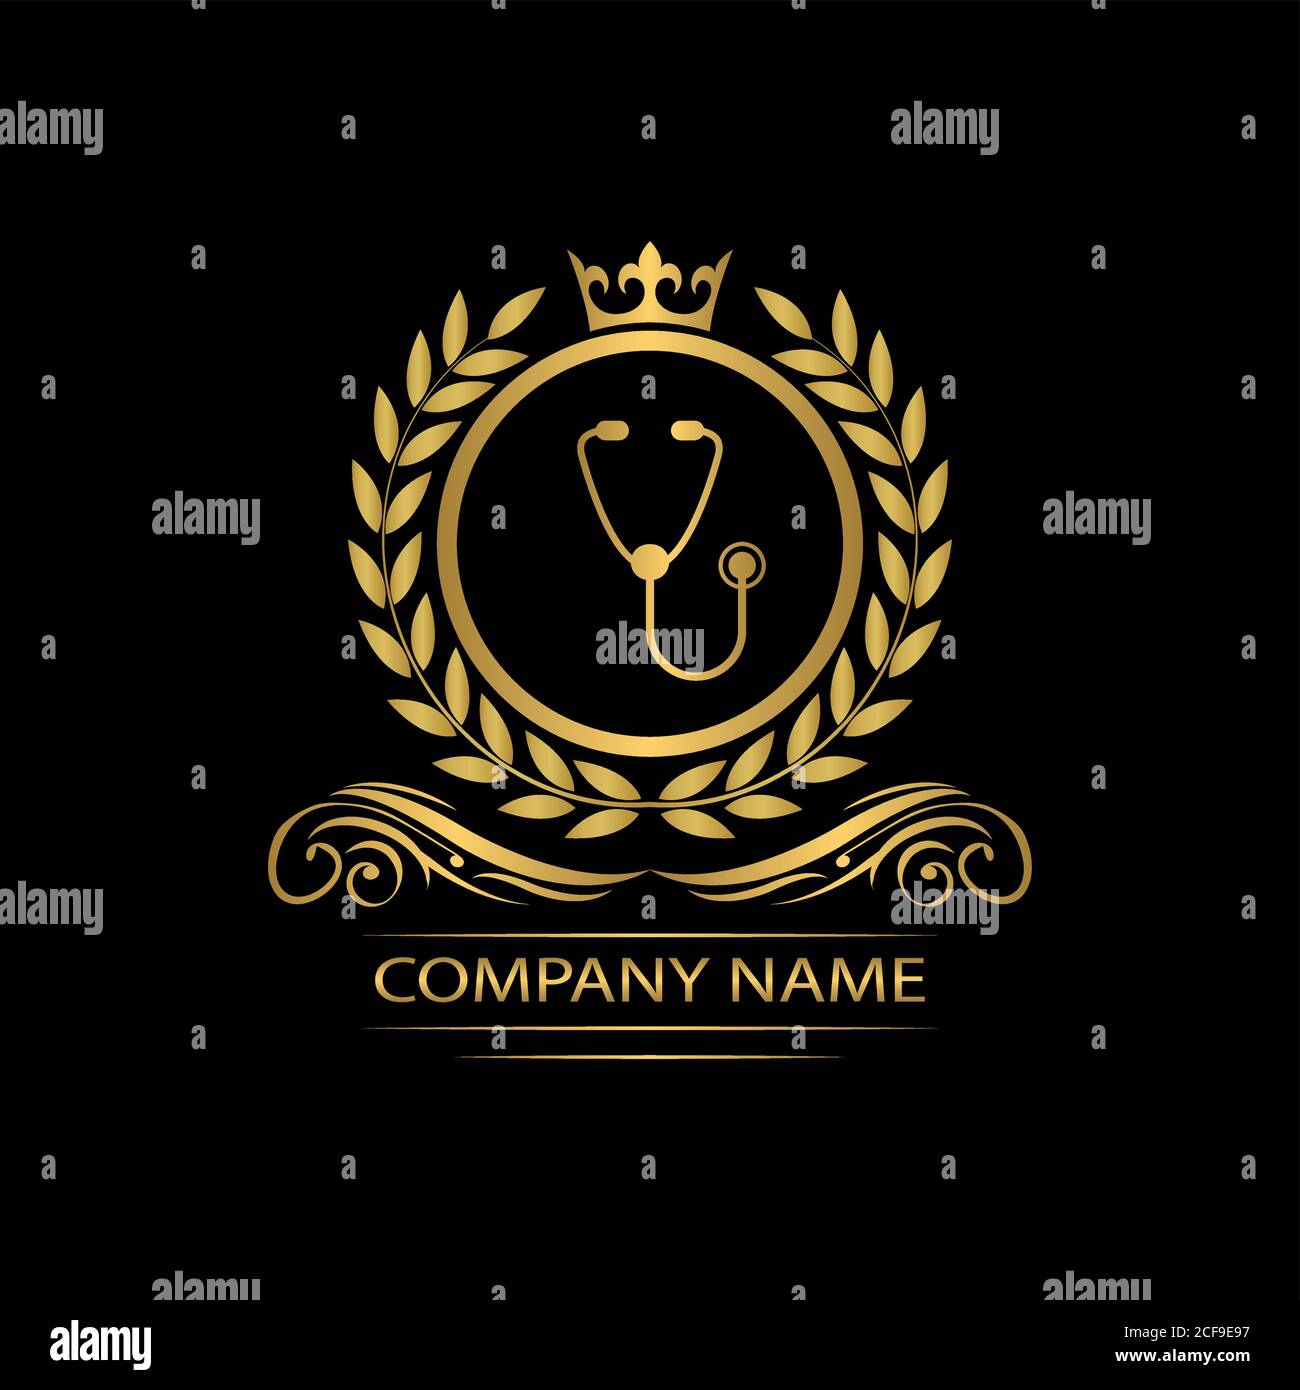 clinic logo template luxury royal vector clinic icon company decorative emblem with crown Stock Vector